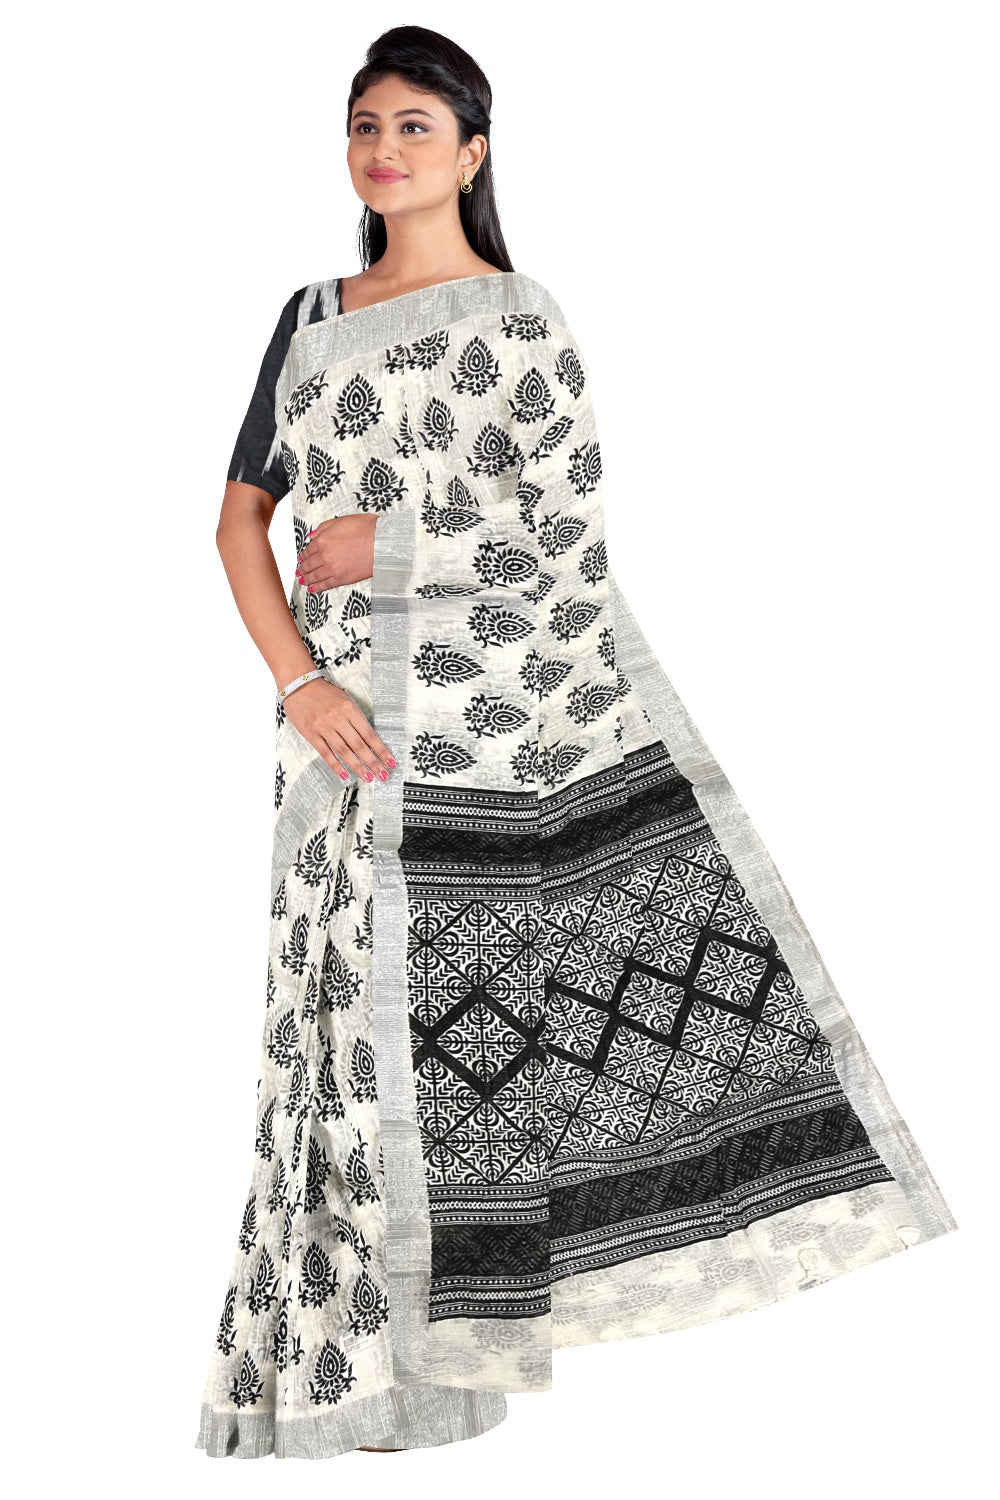 Southloom Linen Designer Saree with Black Prints on White Body and Ikat Printed Blouse Piece